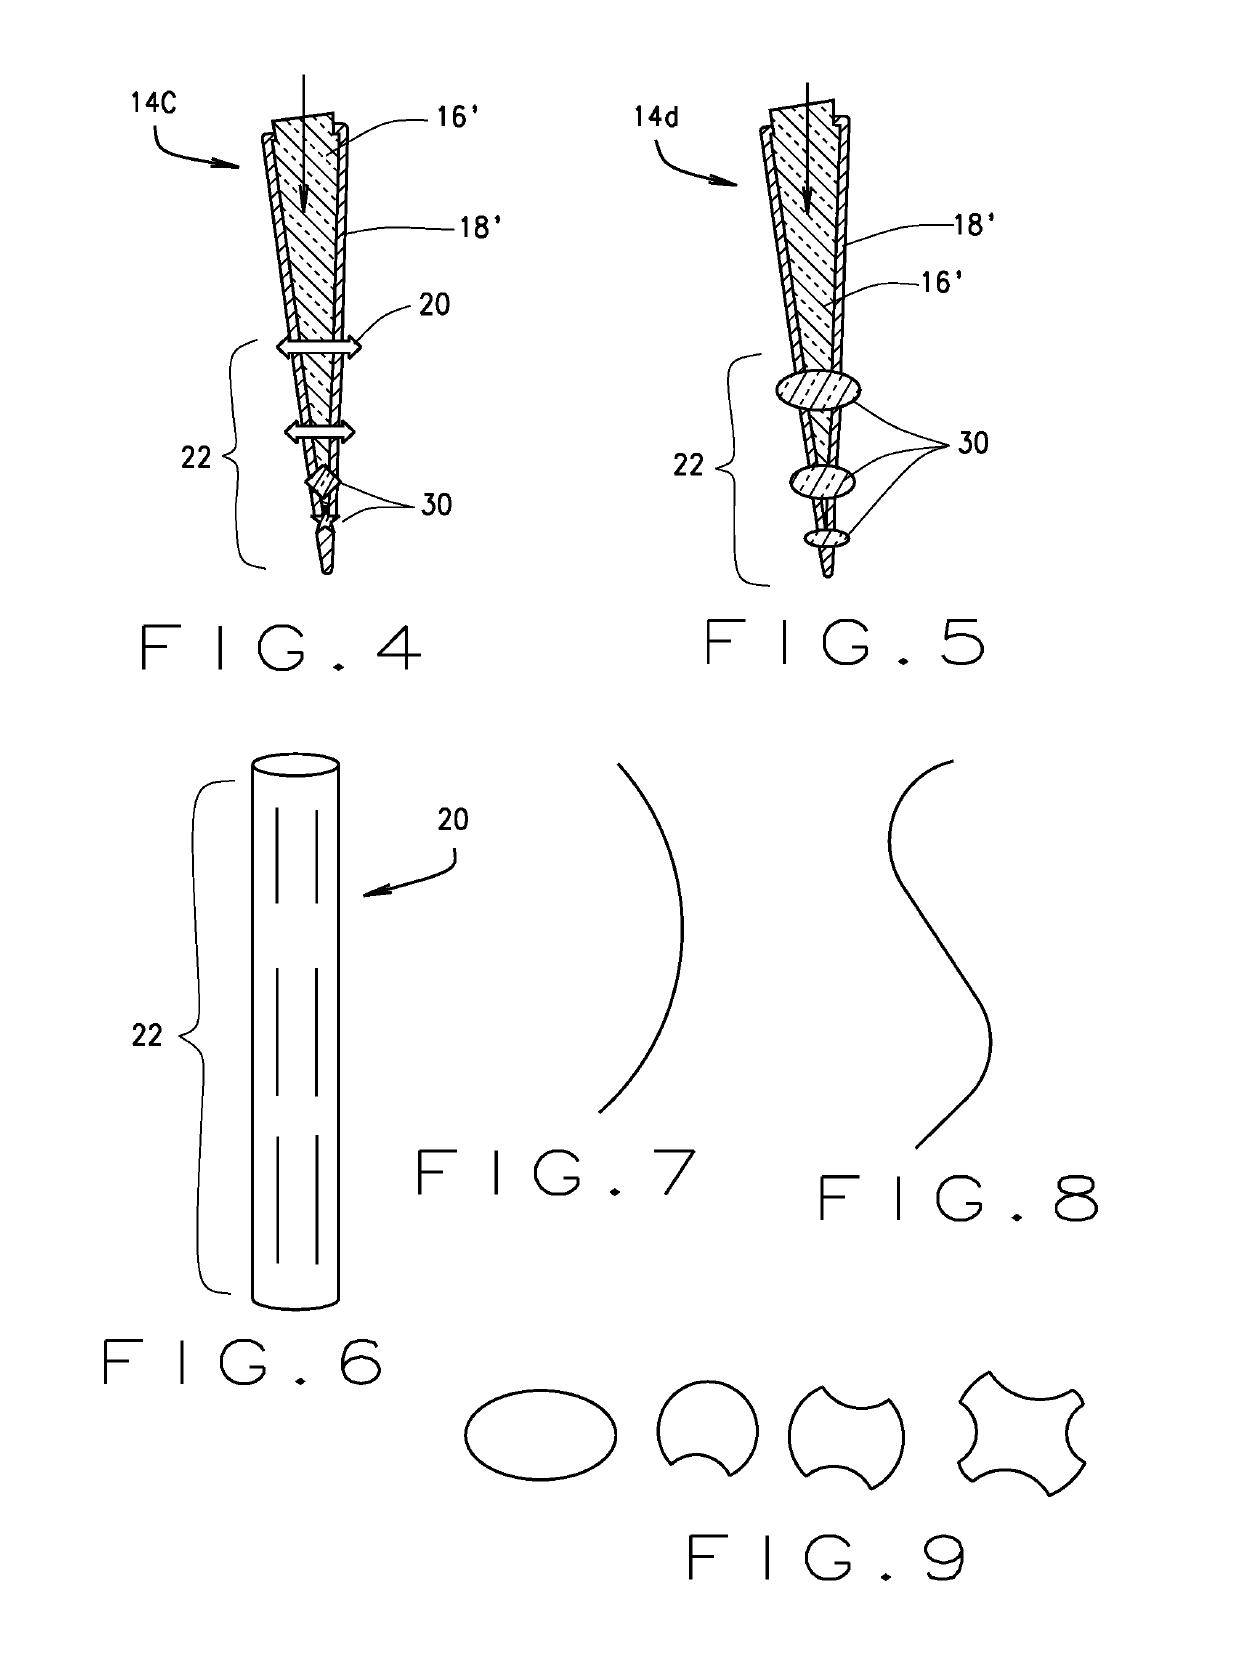 Synergistic ultrasonic, sonic or electric energy and light transmitting probe for disinfection of root canals during an endodontic procedure